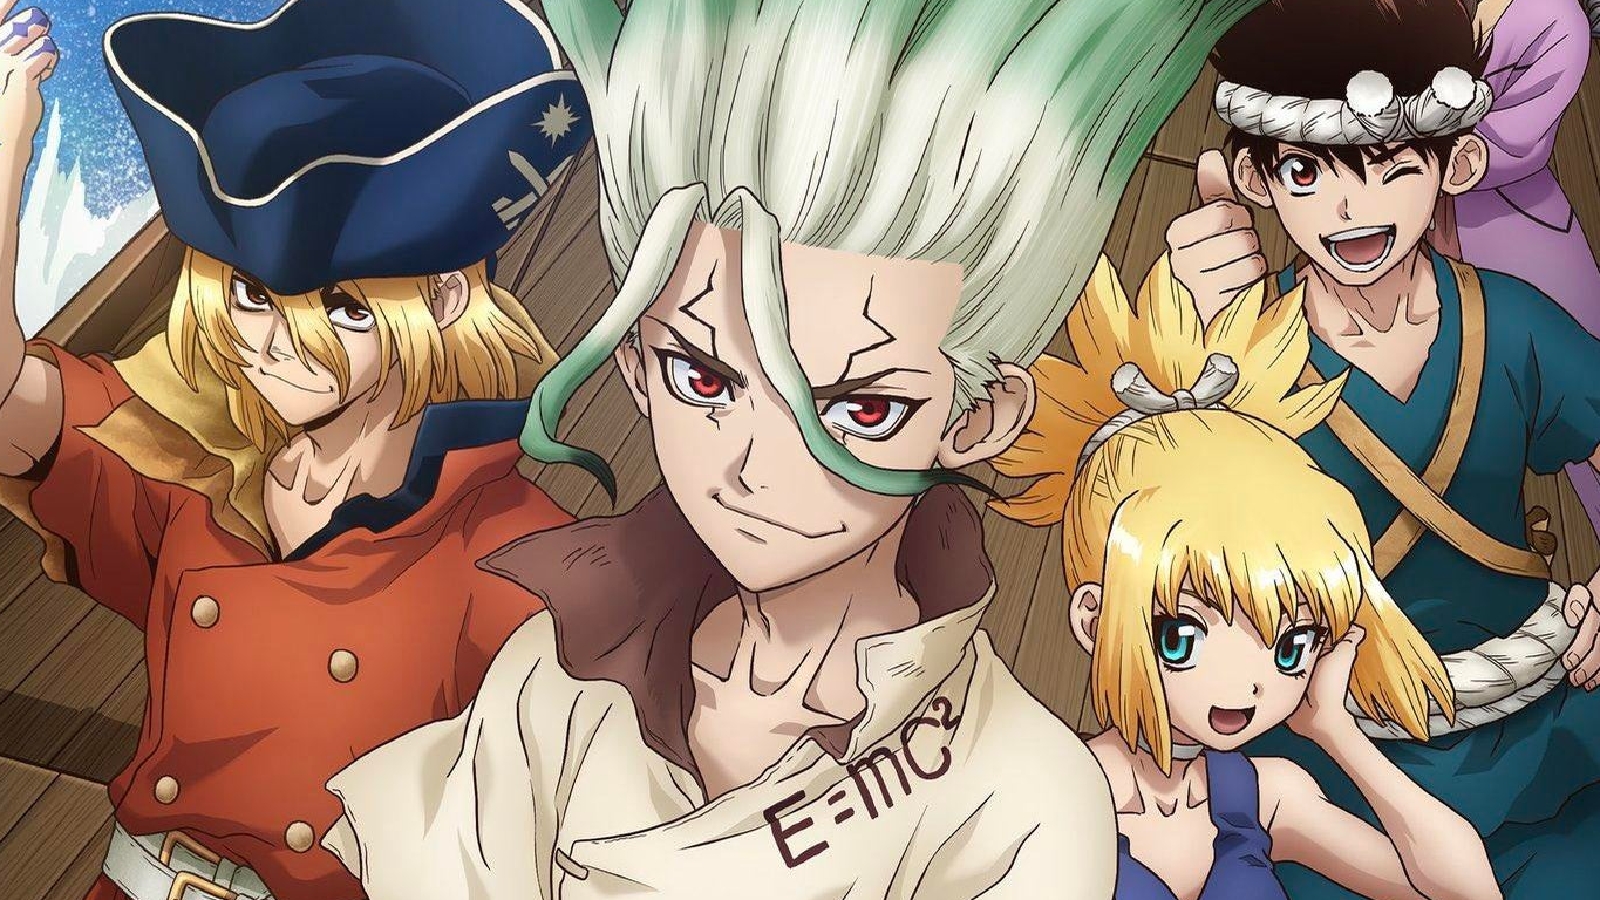 Dr. Stone' Season Three Sets Sail With Debut Trailer And Official Release  Date Announcement - Bounding Into Comics